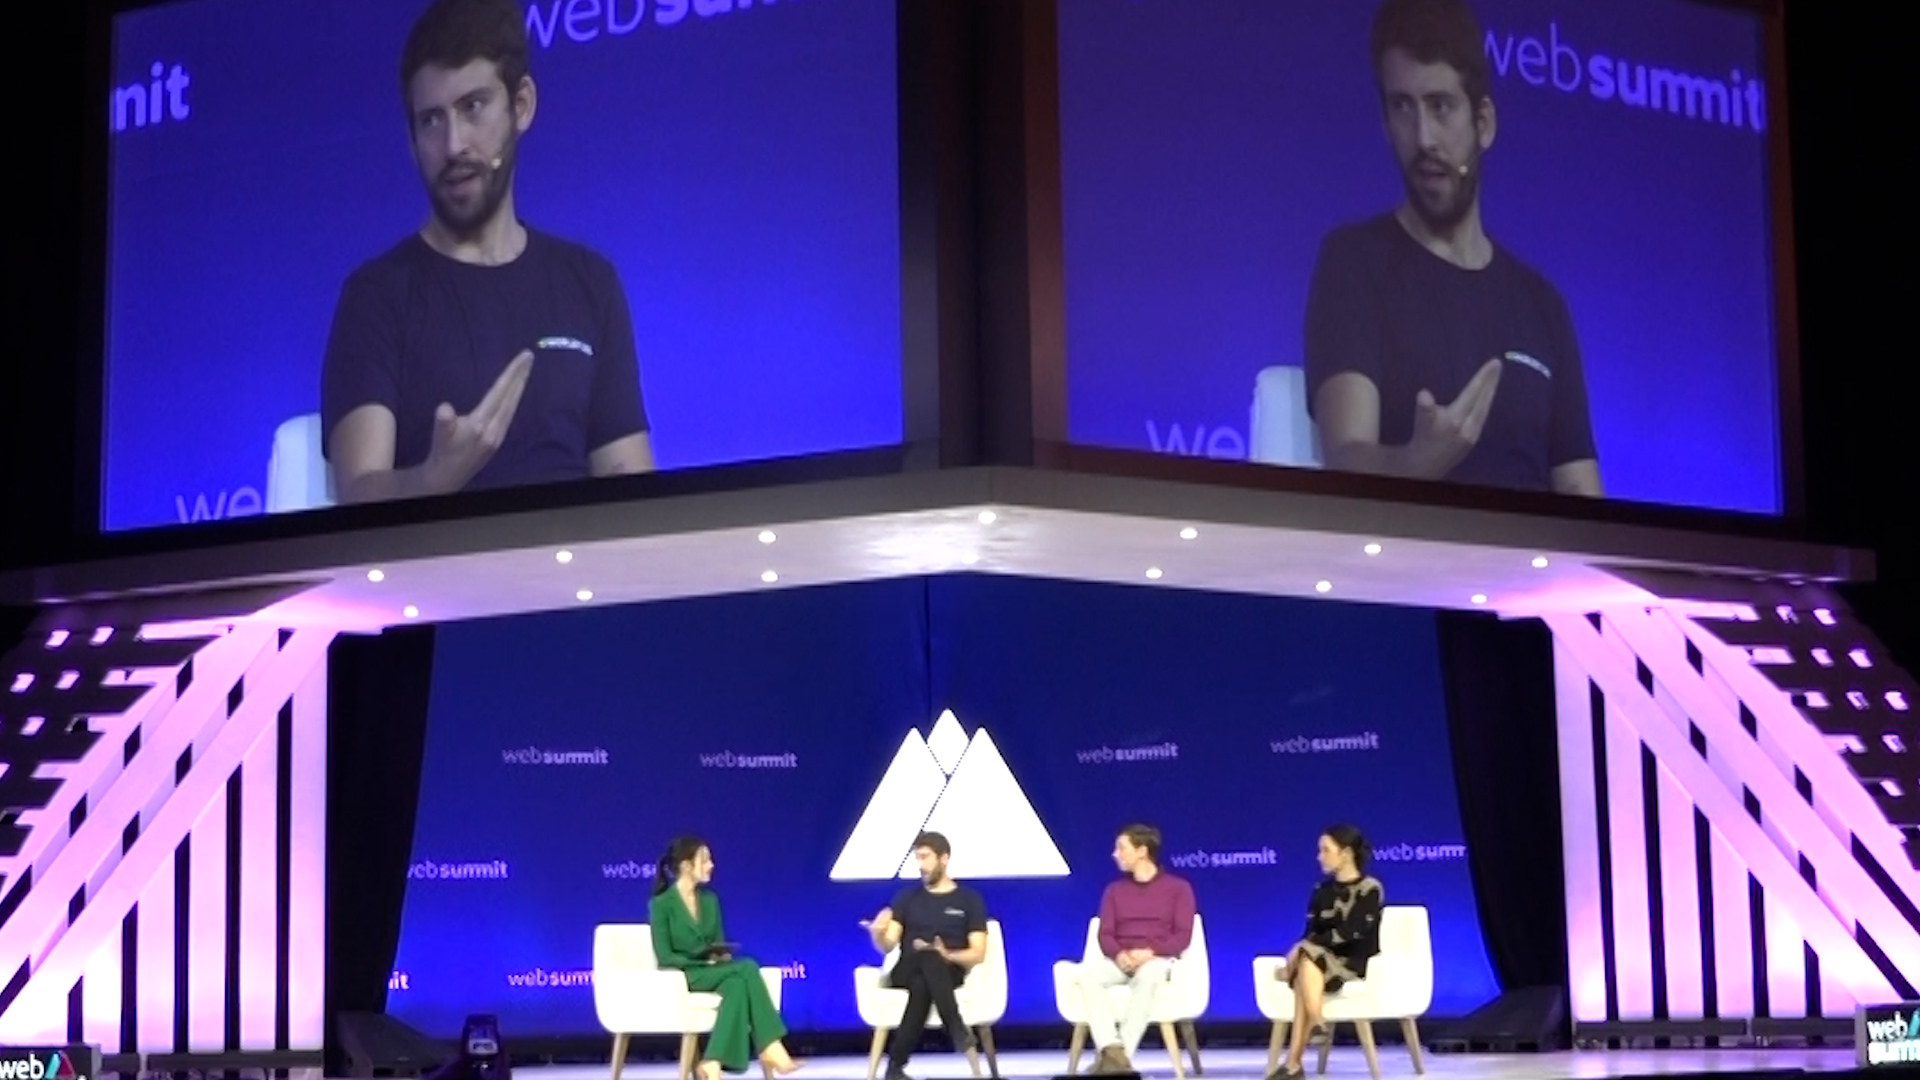 Web Summit is an annual technology conference held in Lisbon./ CGTN